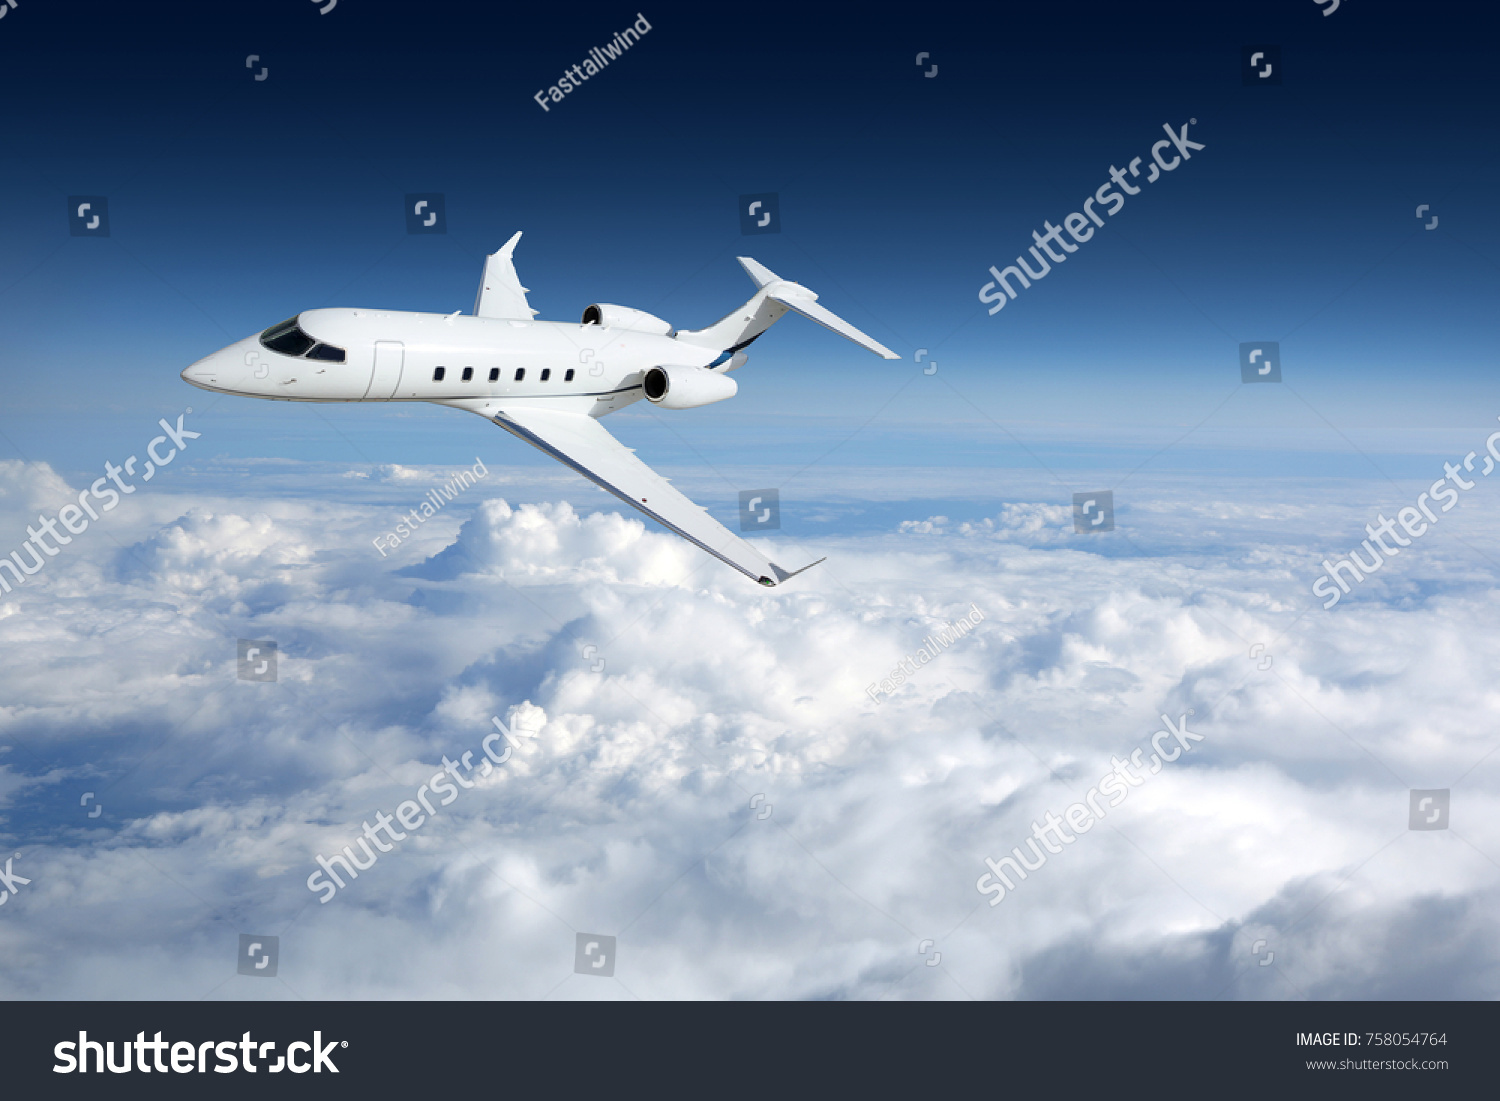 Business jet airplane flying on a high altitude above the clouds #758054764